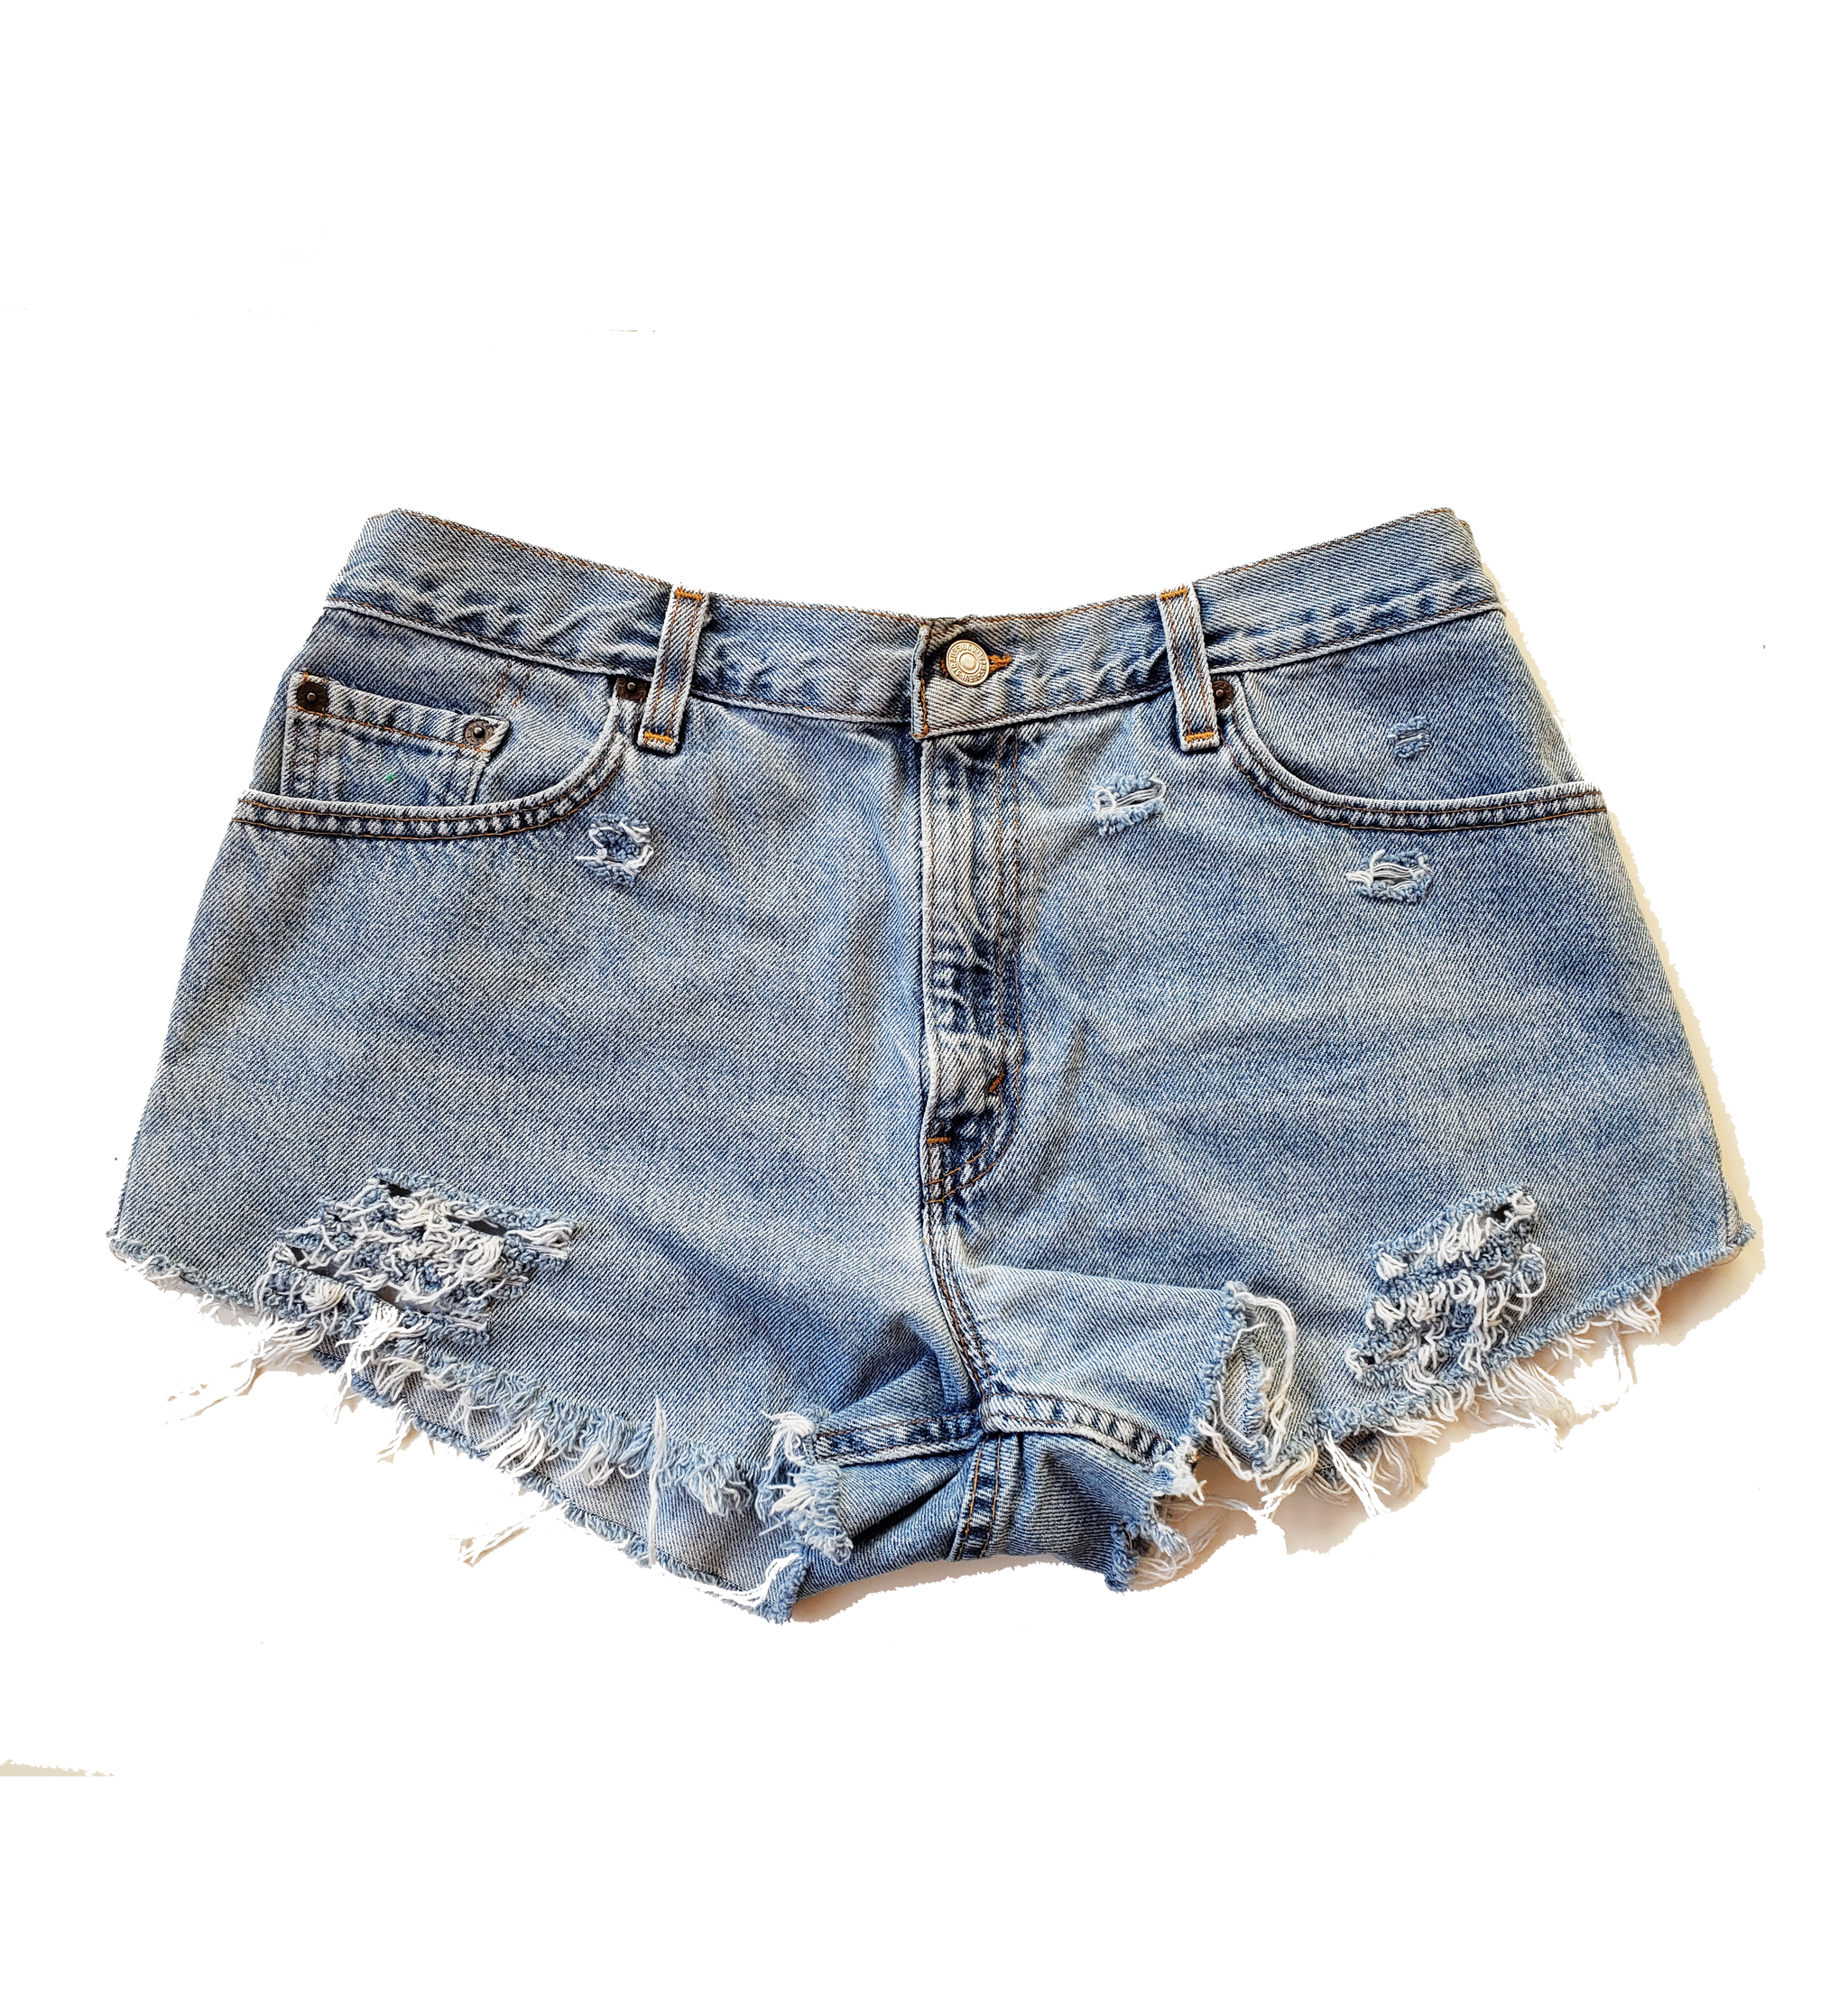 Levis high waisted denim shorts distressed frayed jean shorts by Jeansonly